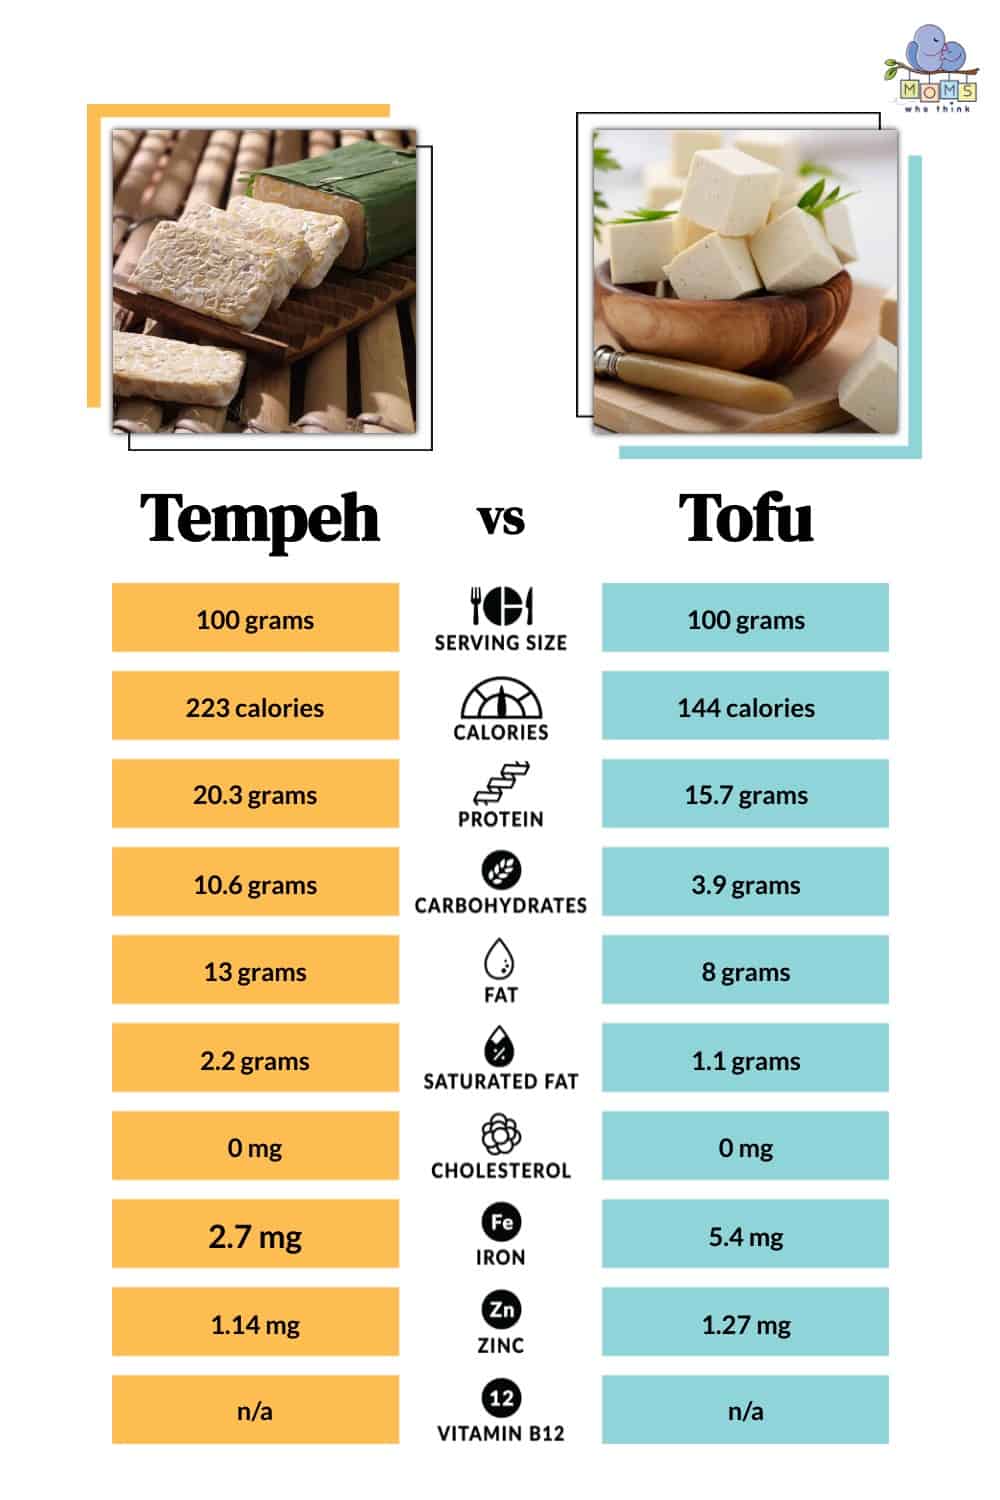 Tempeh vs Tofu Nutritional Facts